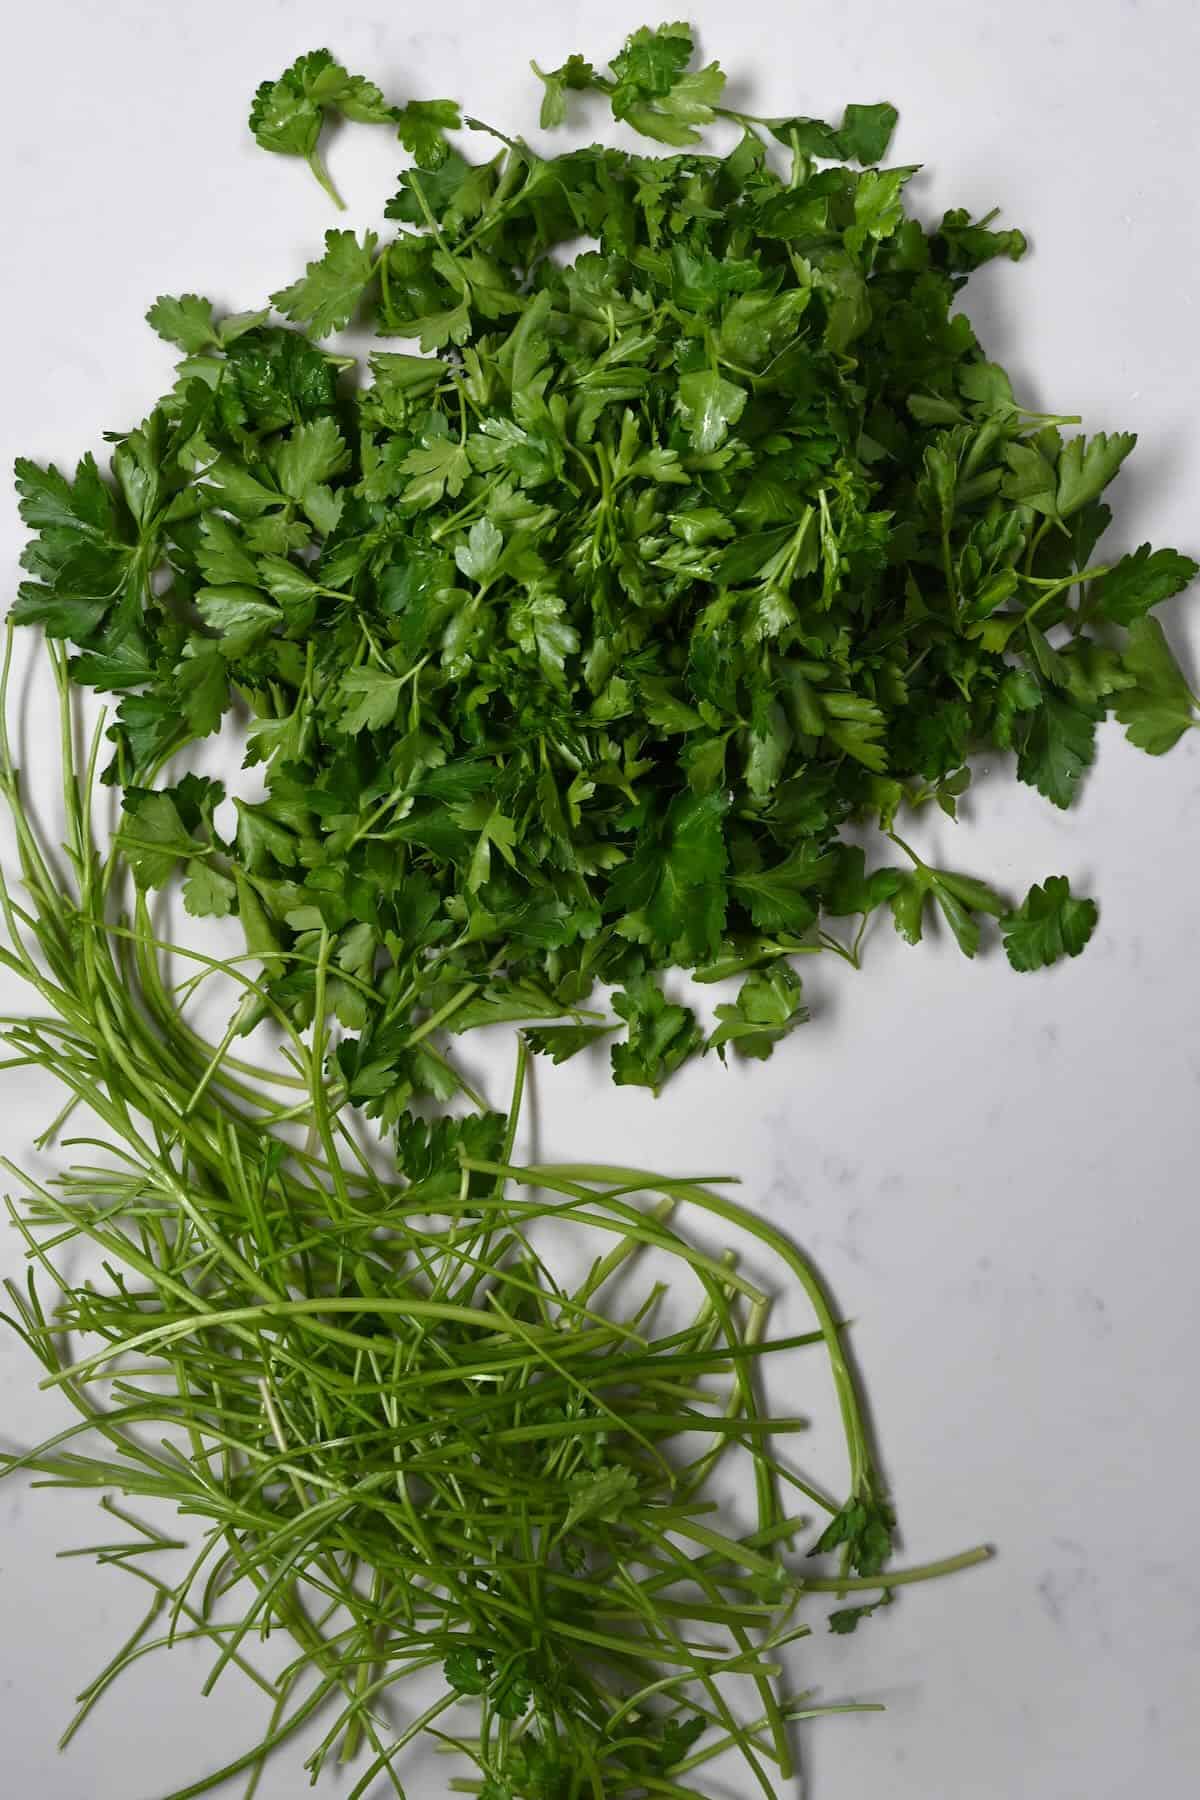 Stems removed from fresh parsley